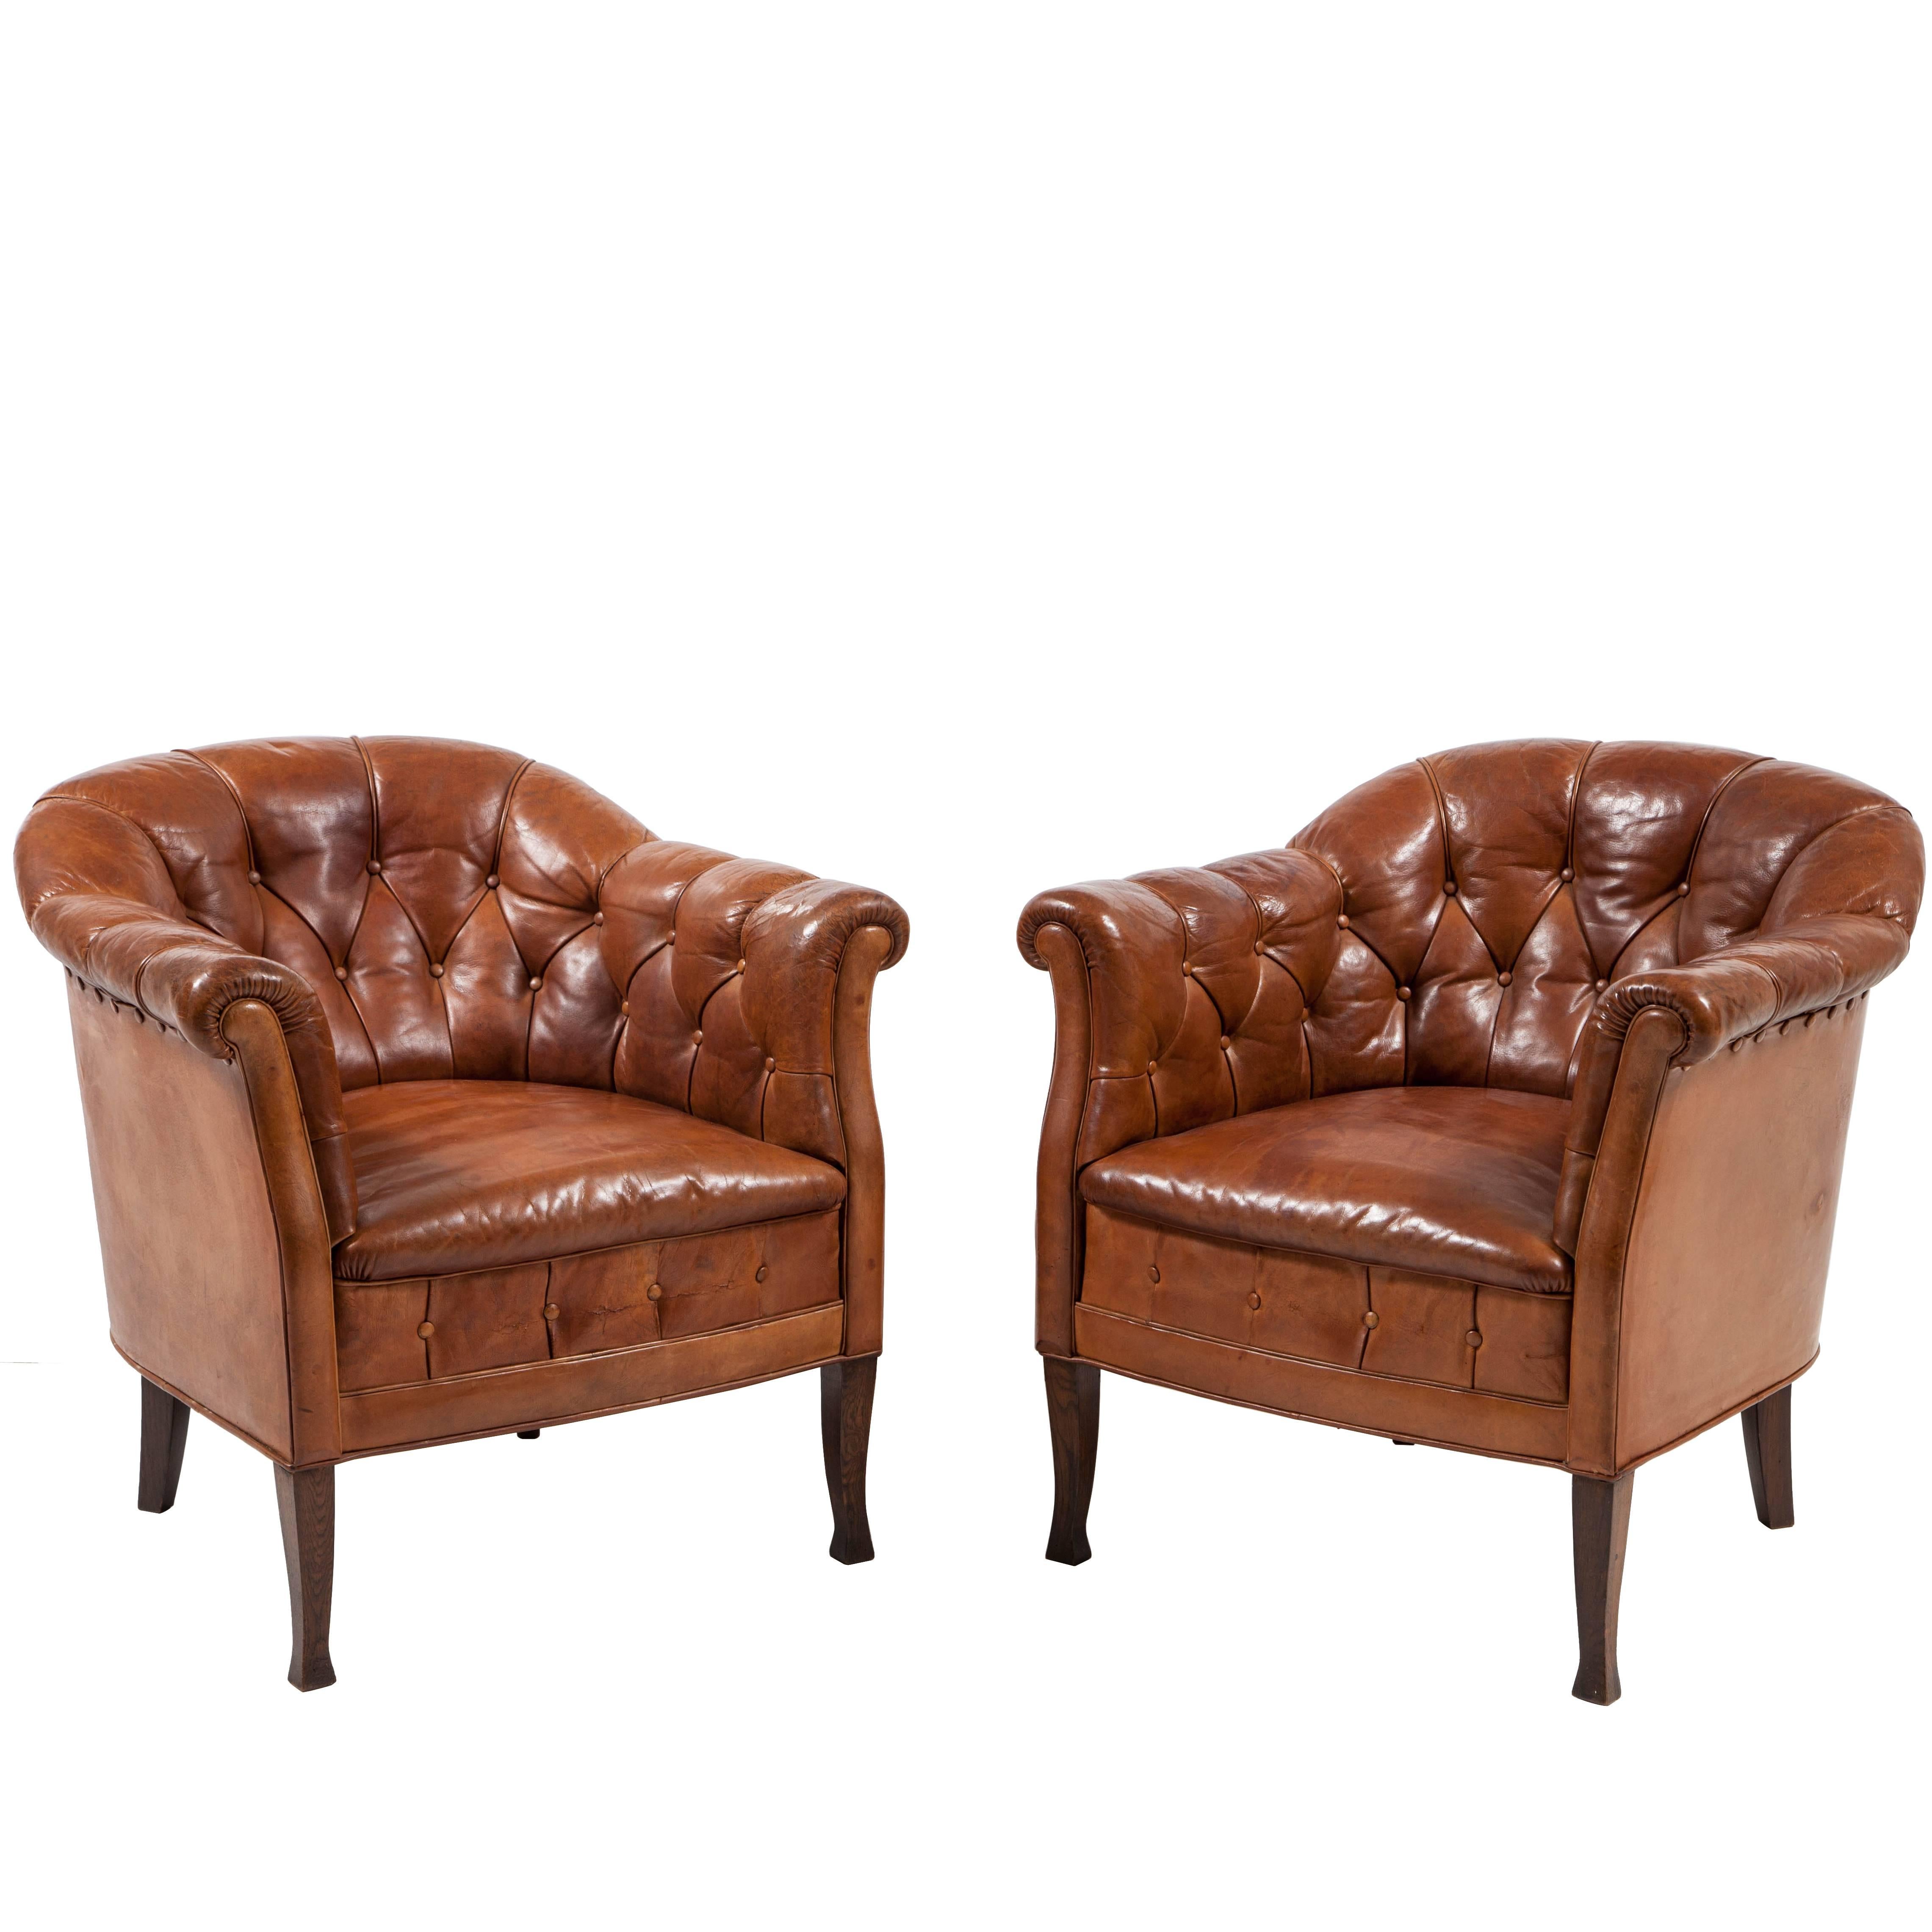 Pair of Swedish Leather Club Chairs